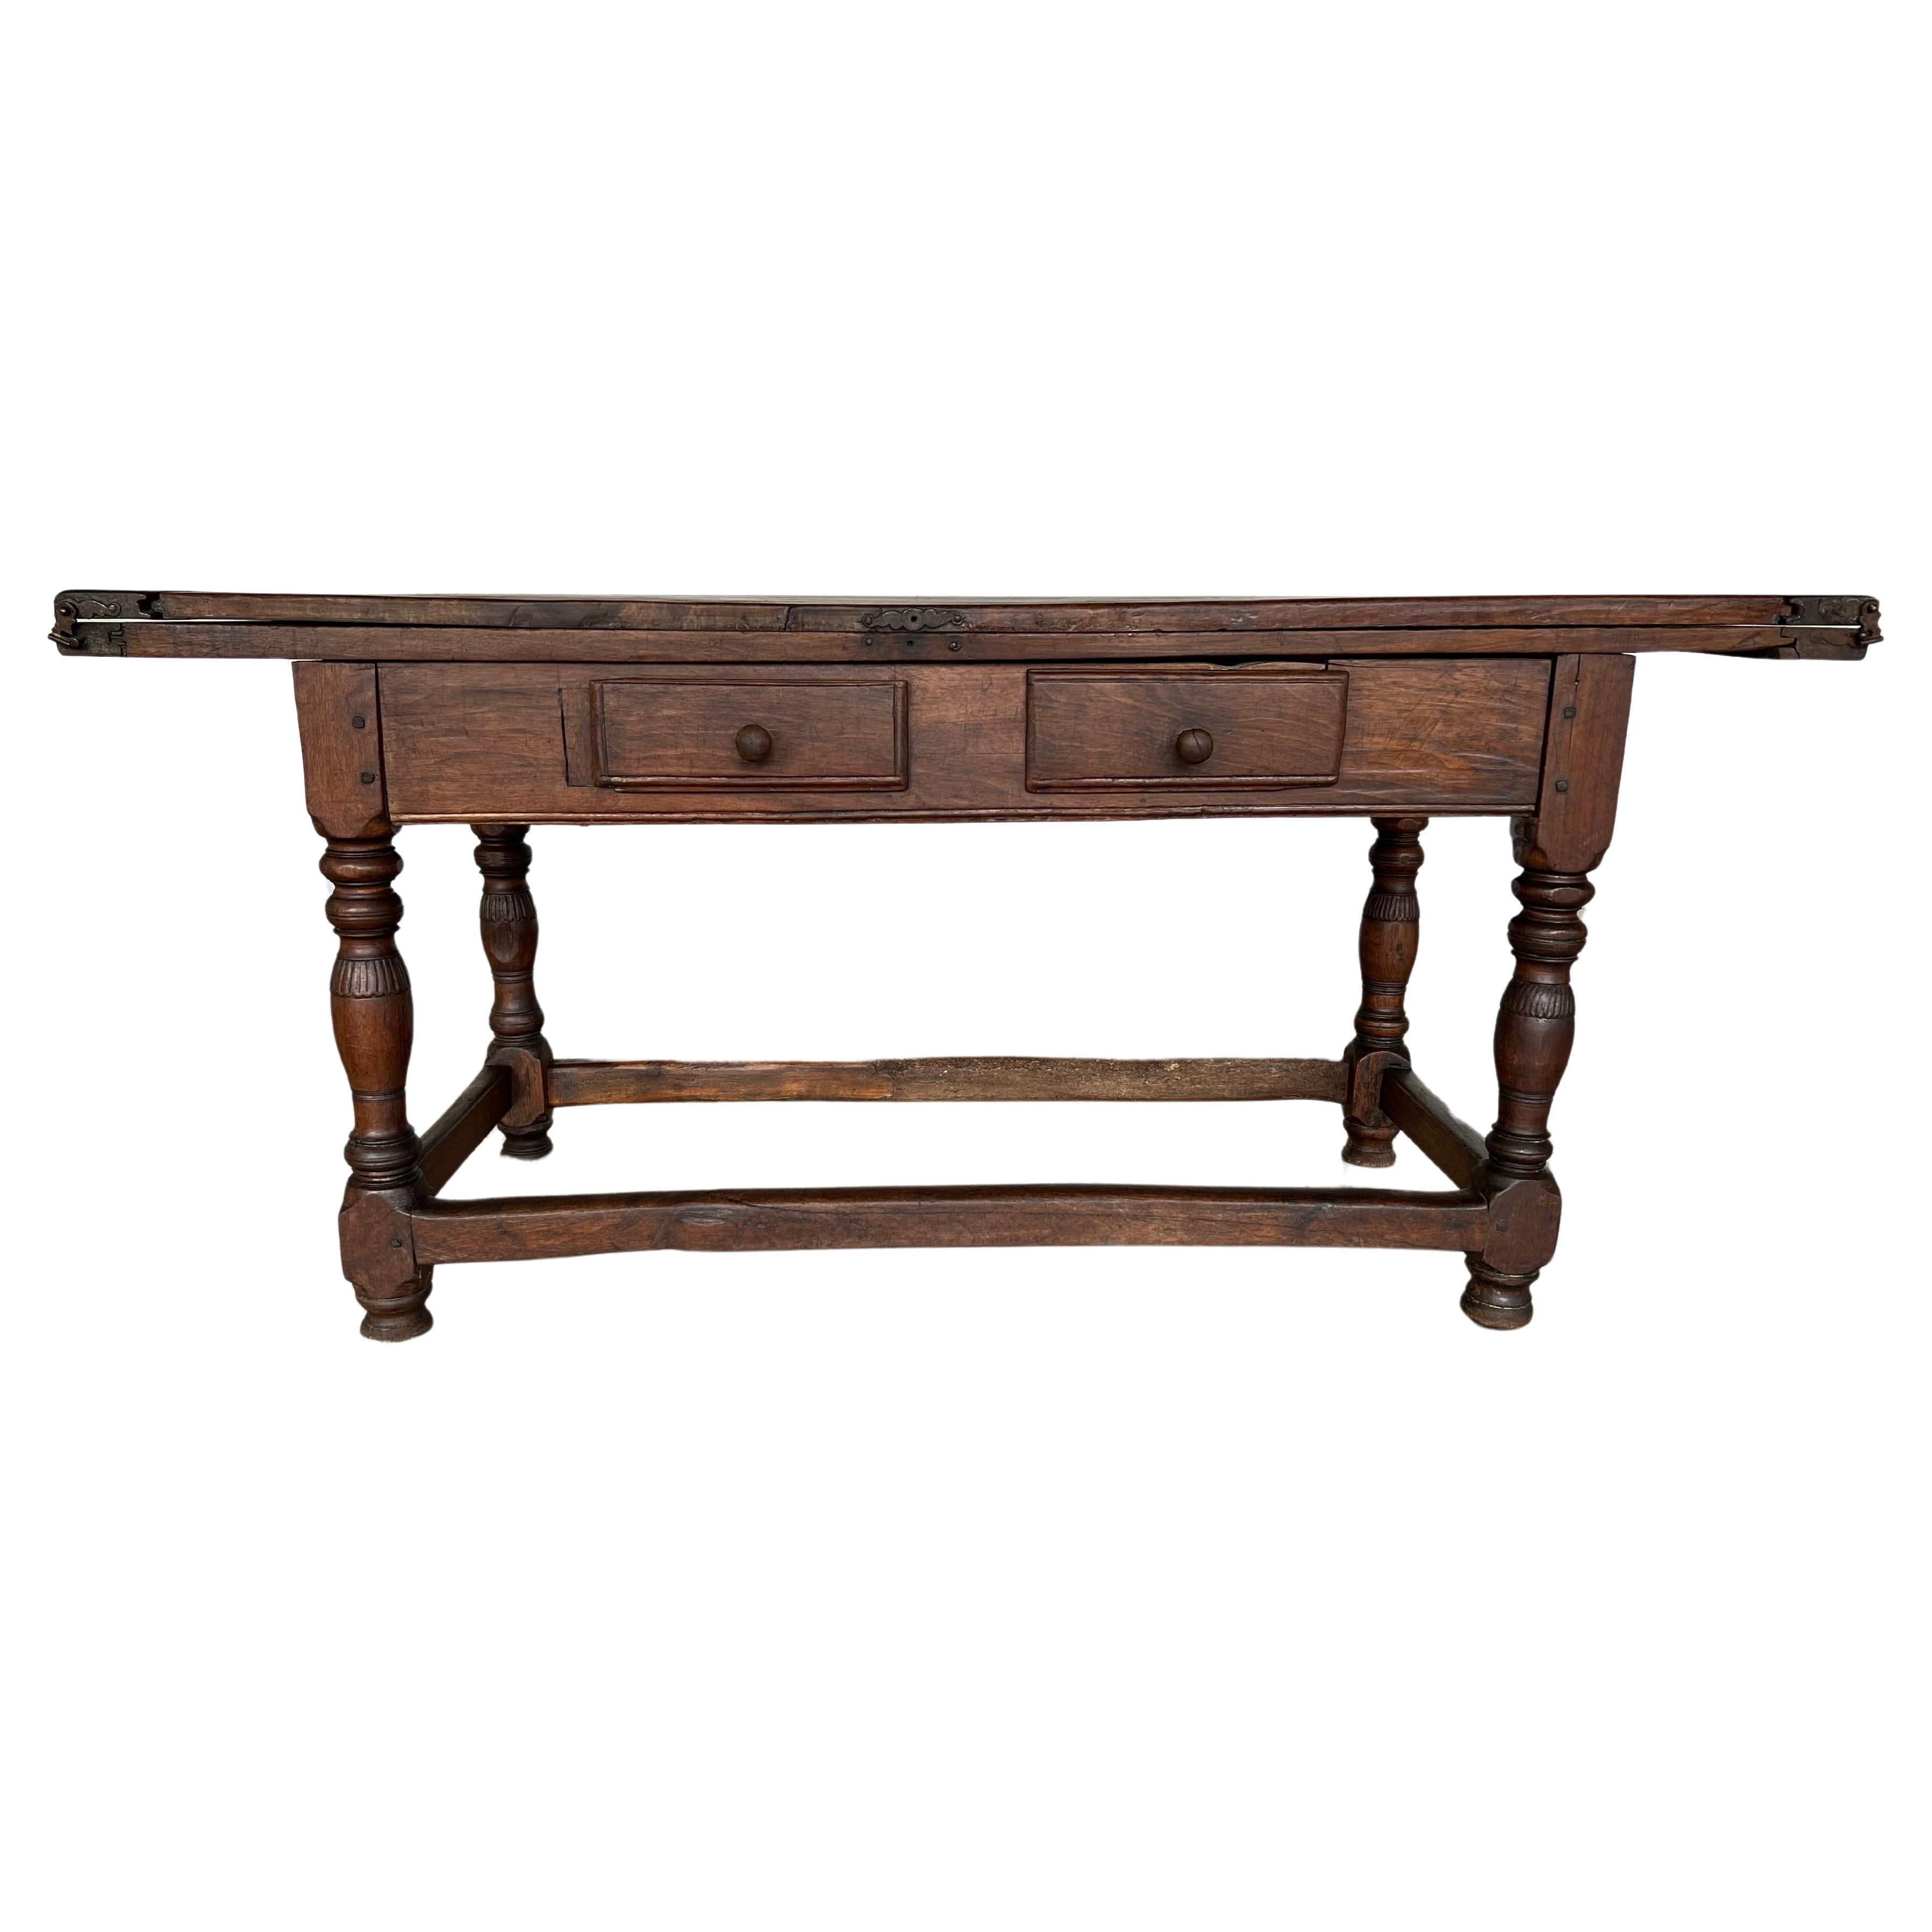 Rare 18c Swiss French Alp Rustic Flip Top Dining Table or Desk With Two Drawers For Sale